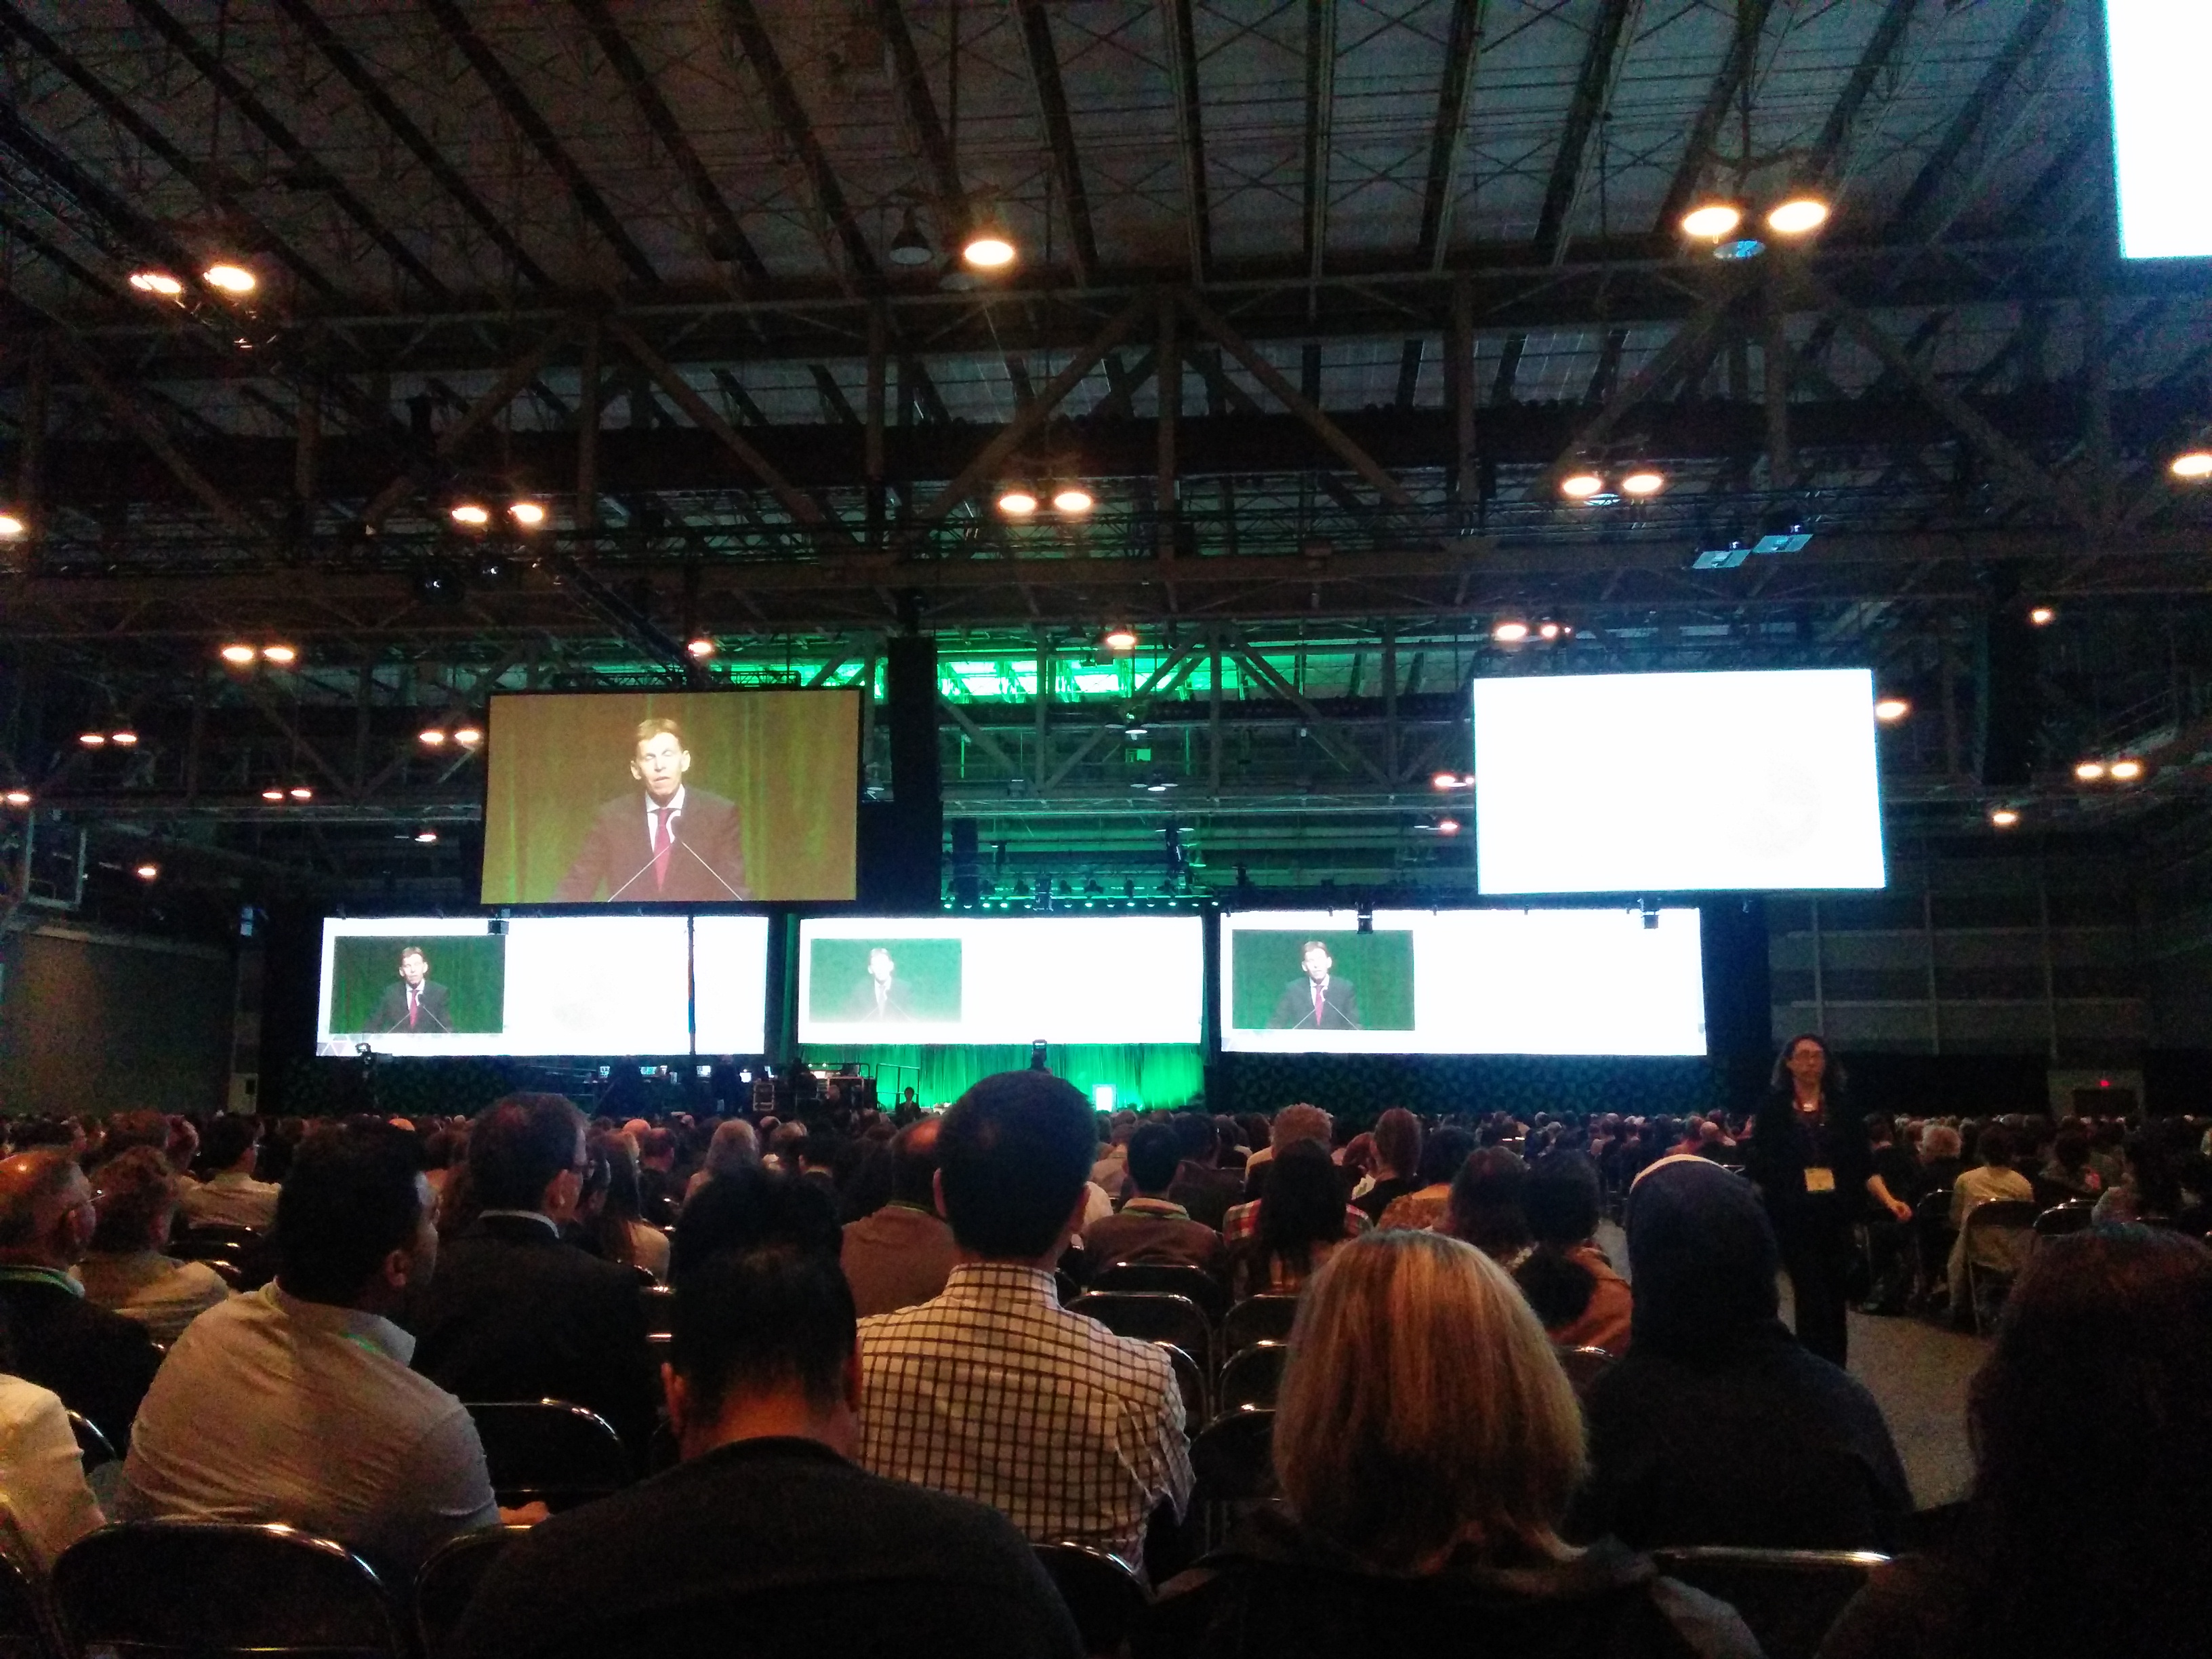 The plenary hall at AACR